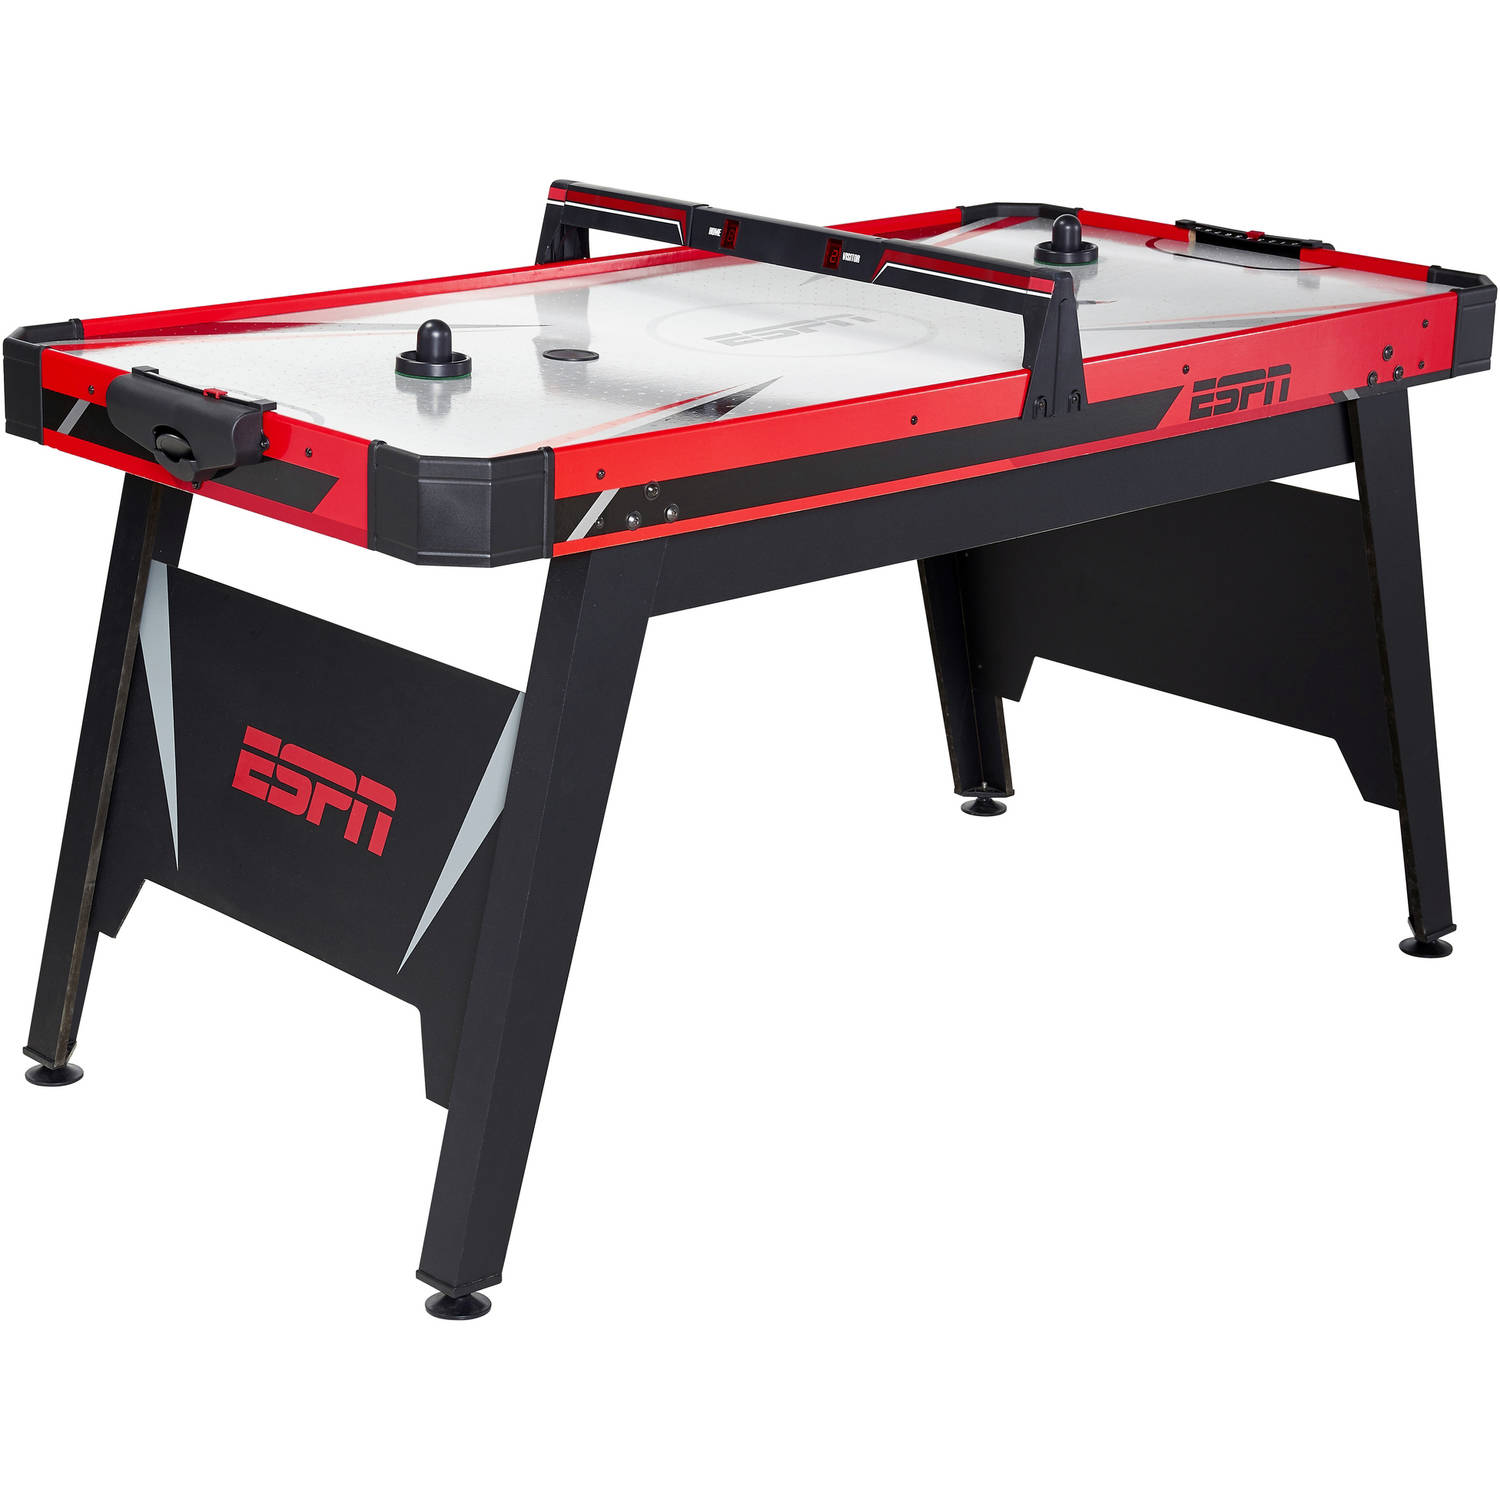 ESPN 60" Air Powered Hockey Table with Overhead Electronic Scorer, Accessories Included, Black/Red - image 1 of 8